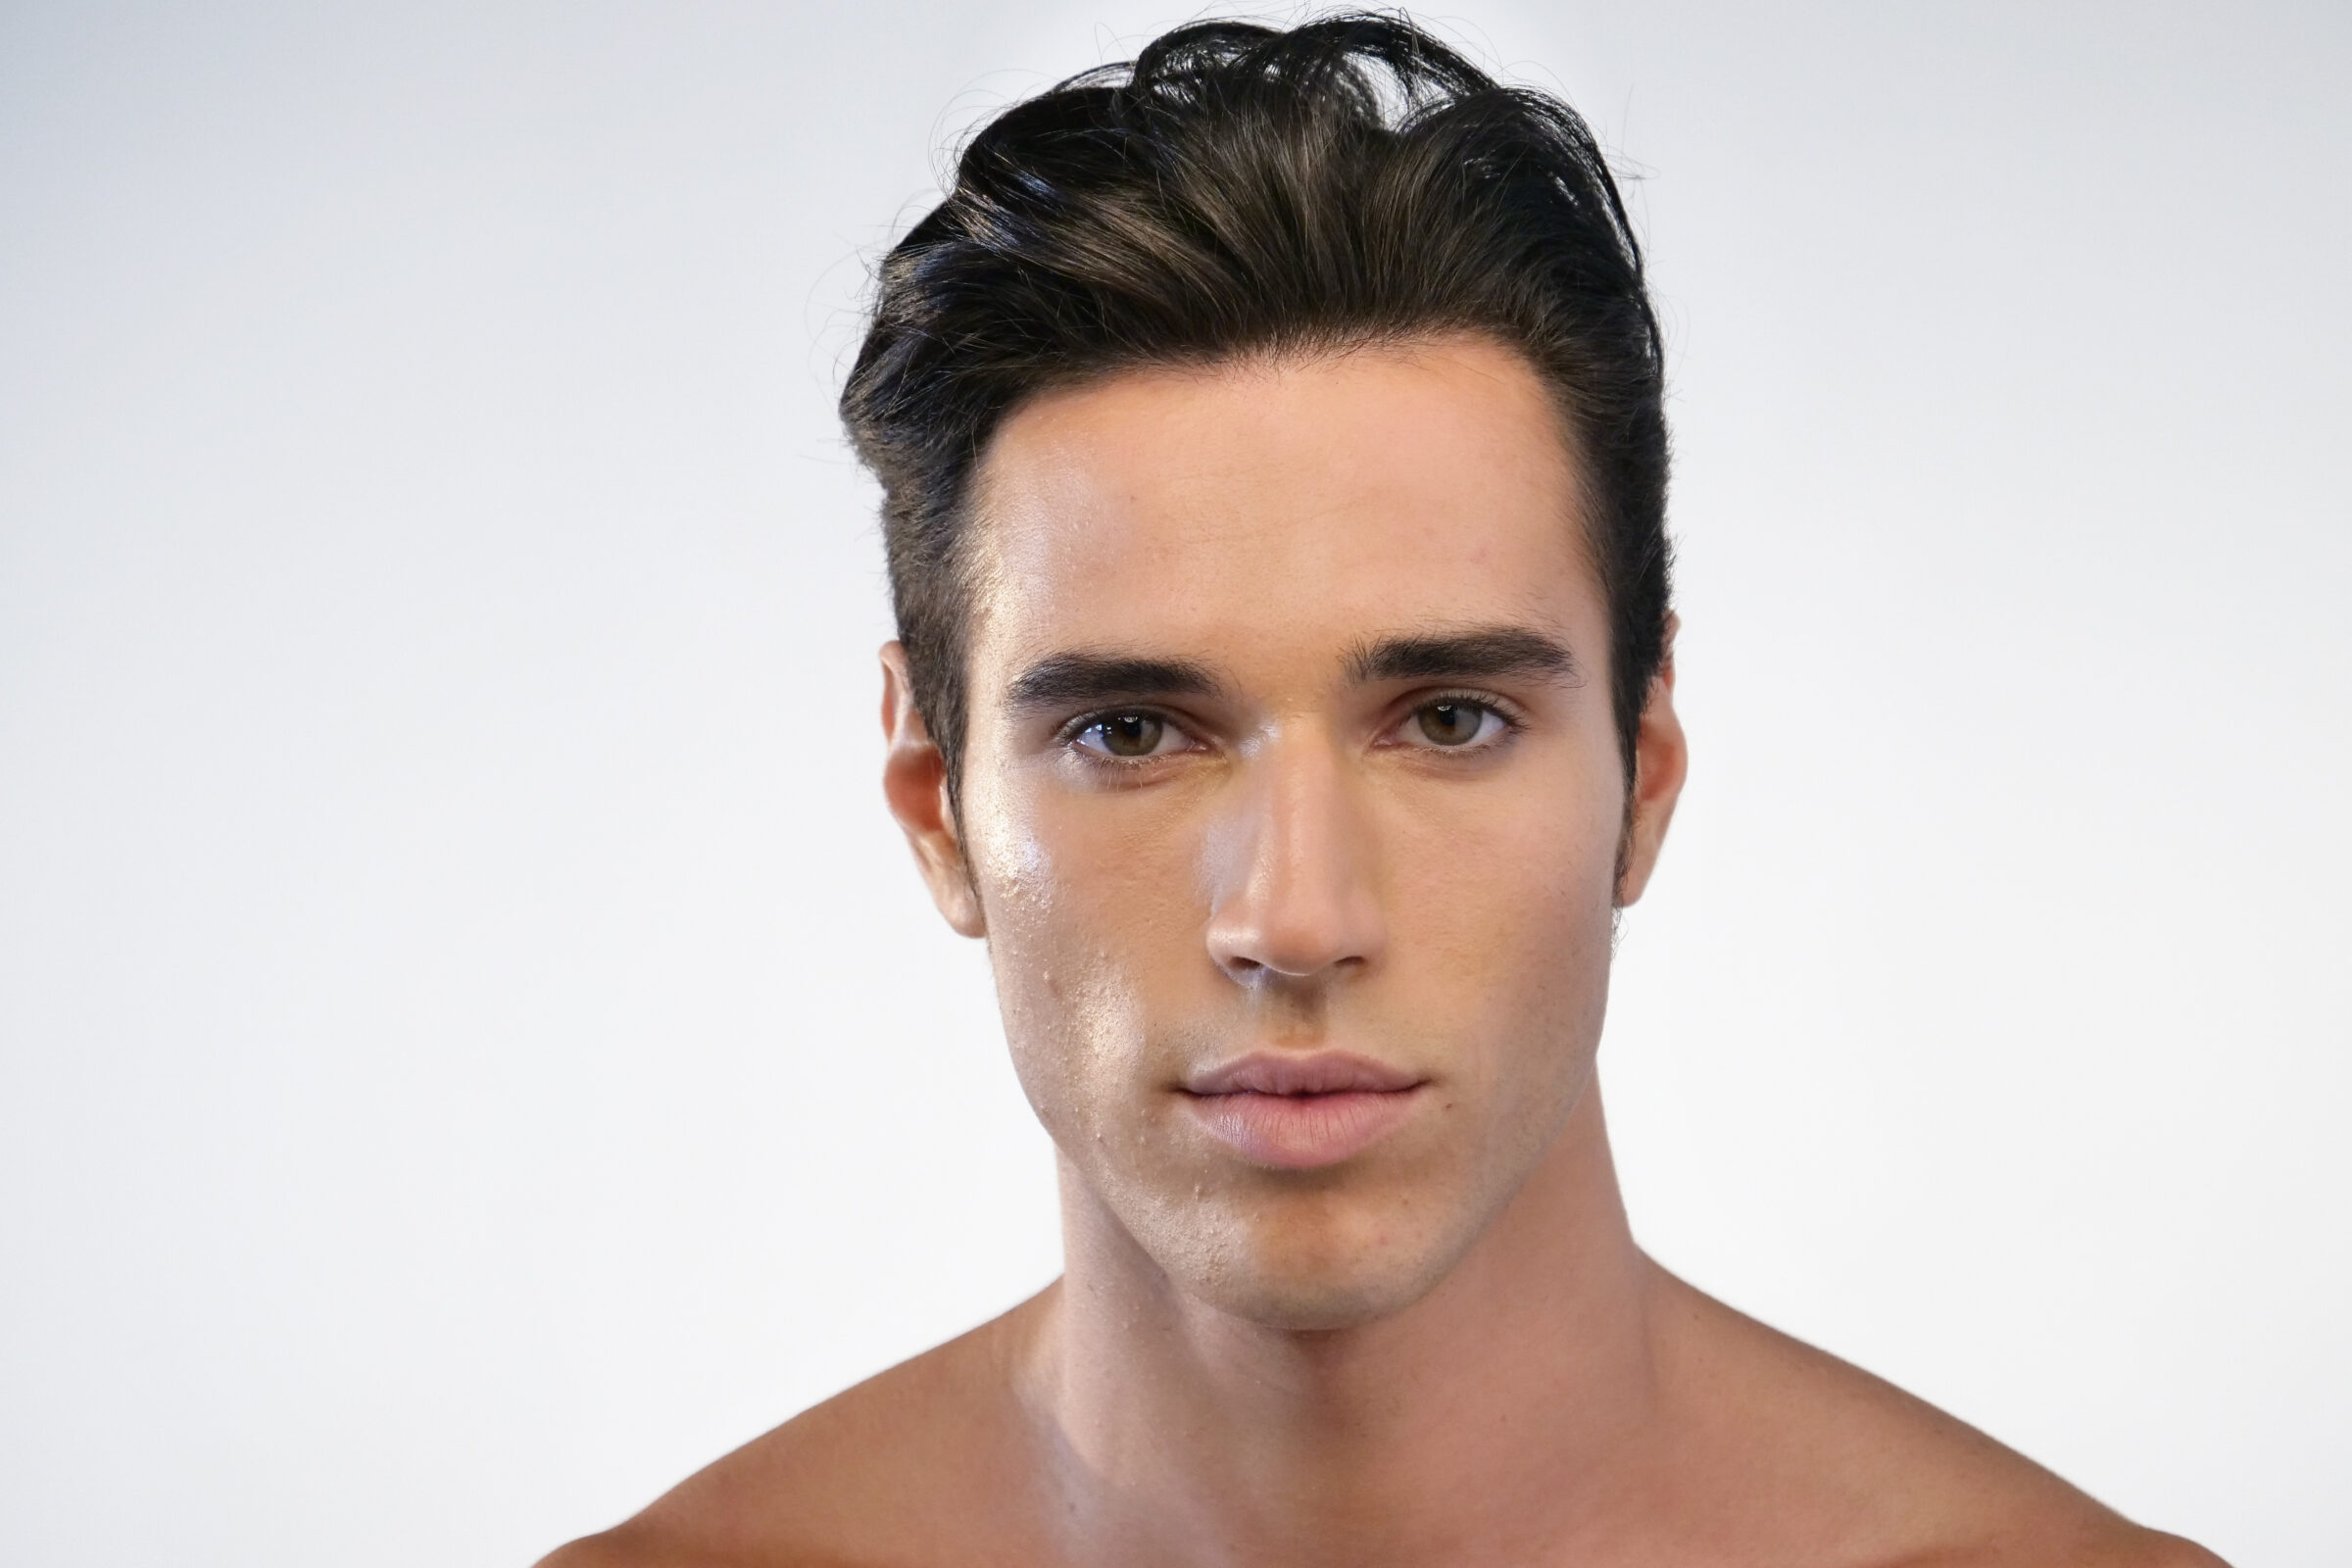 An image of a handsome brunette man's face.